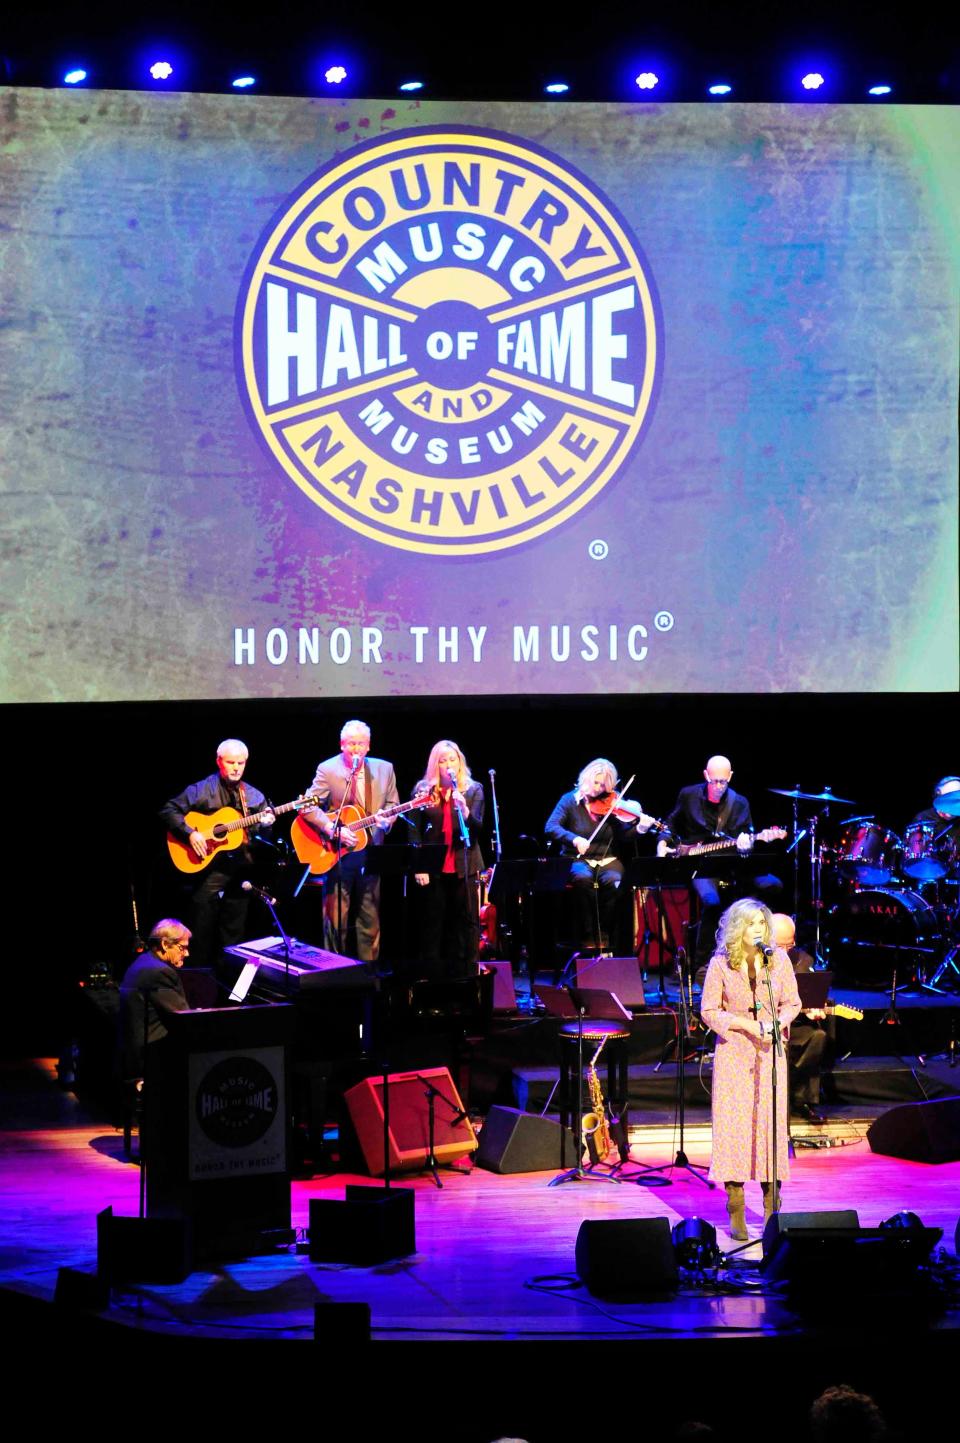 Alison Kraus sings in tribute to Hank Cochran at the Country Music Hall of Fame at the Country Music Hall of Fame and Museum for the induction ceremony Sunday October 26, 2014.